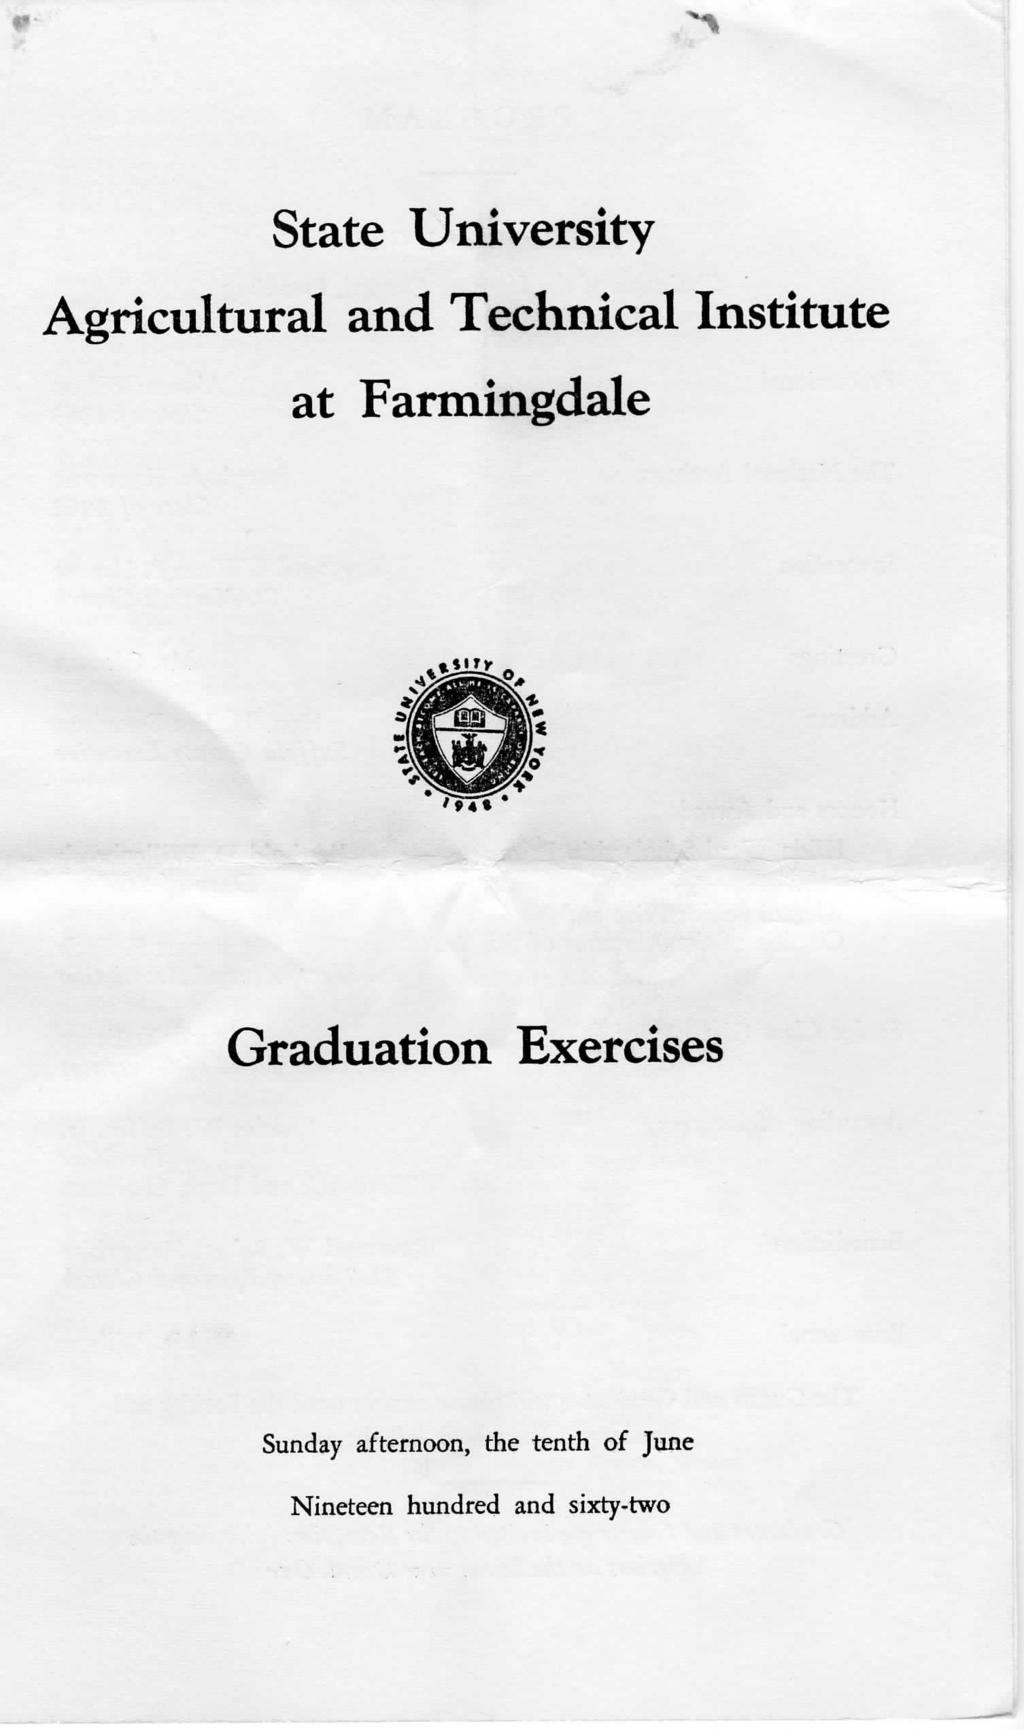 State University Agricultural and Technical Institute at Farmingdale